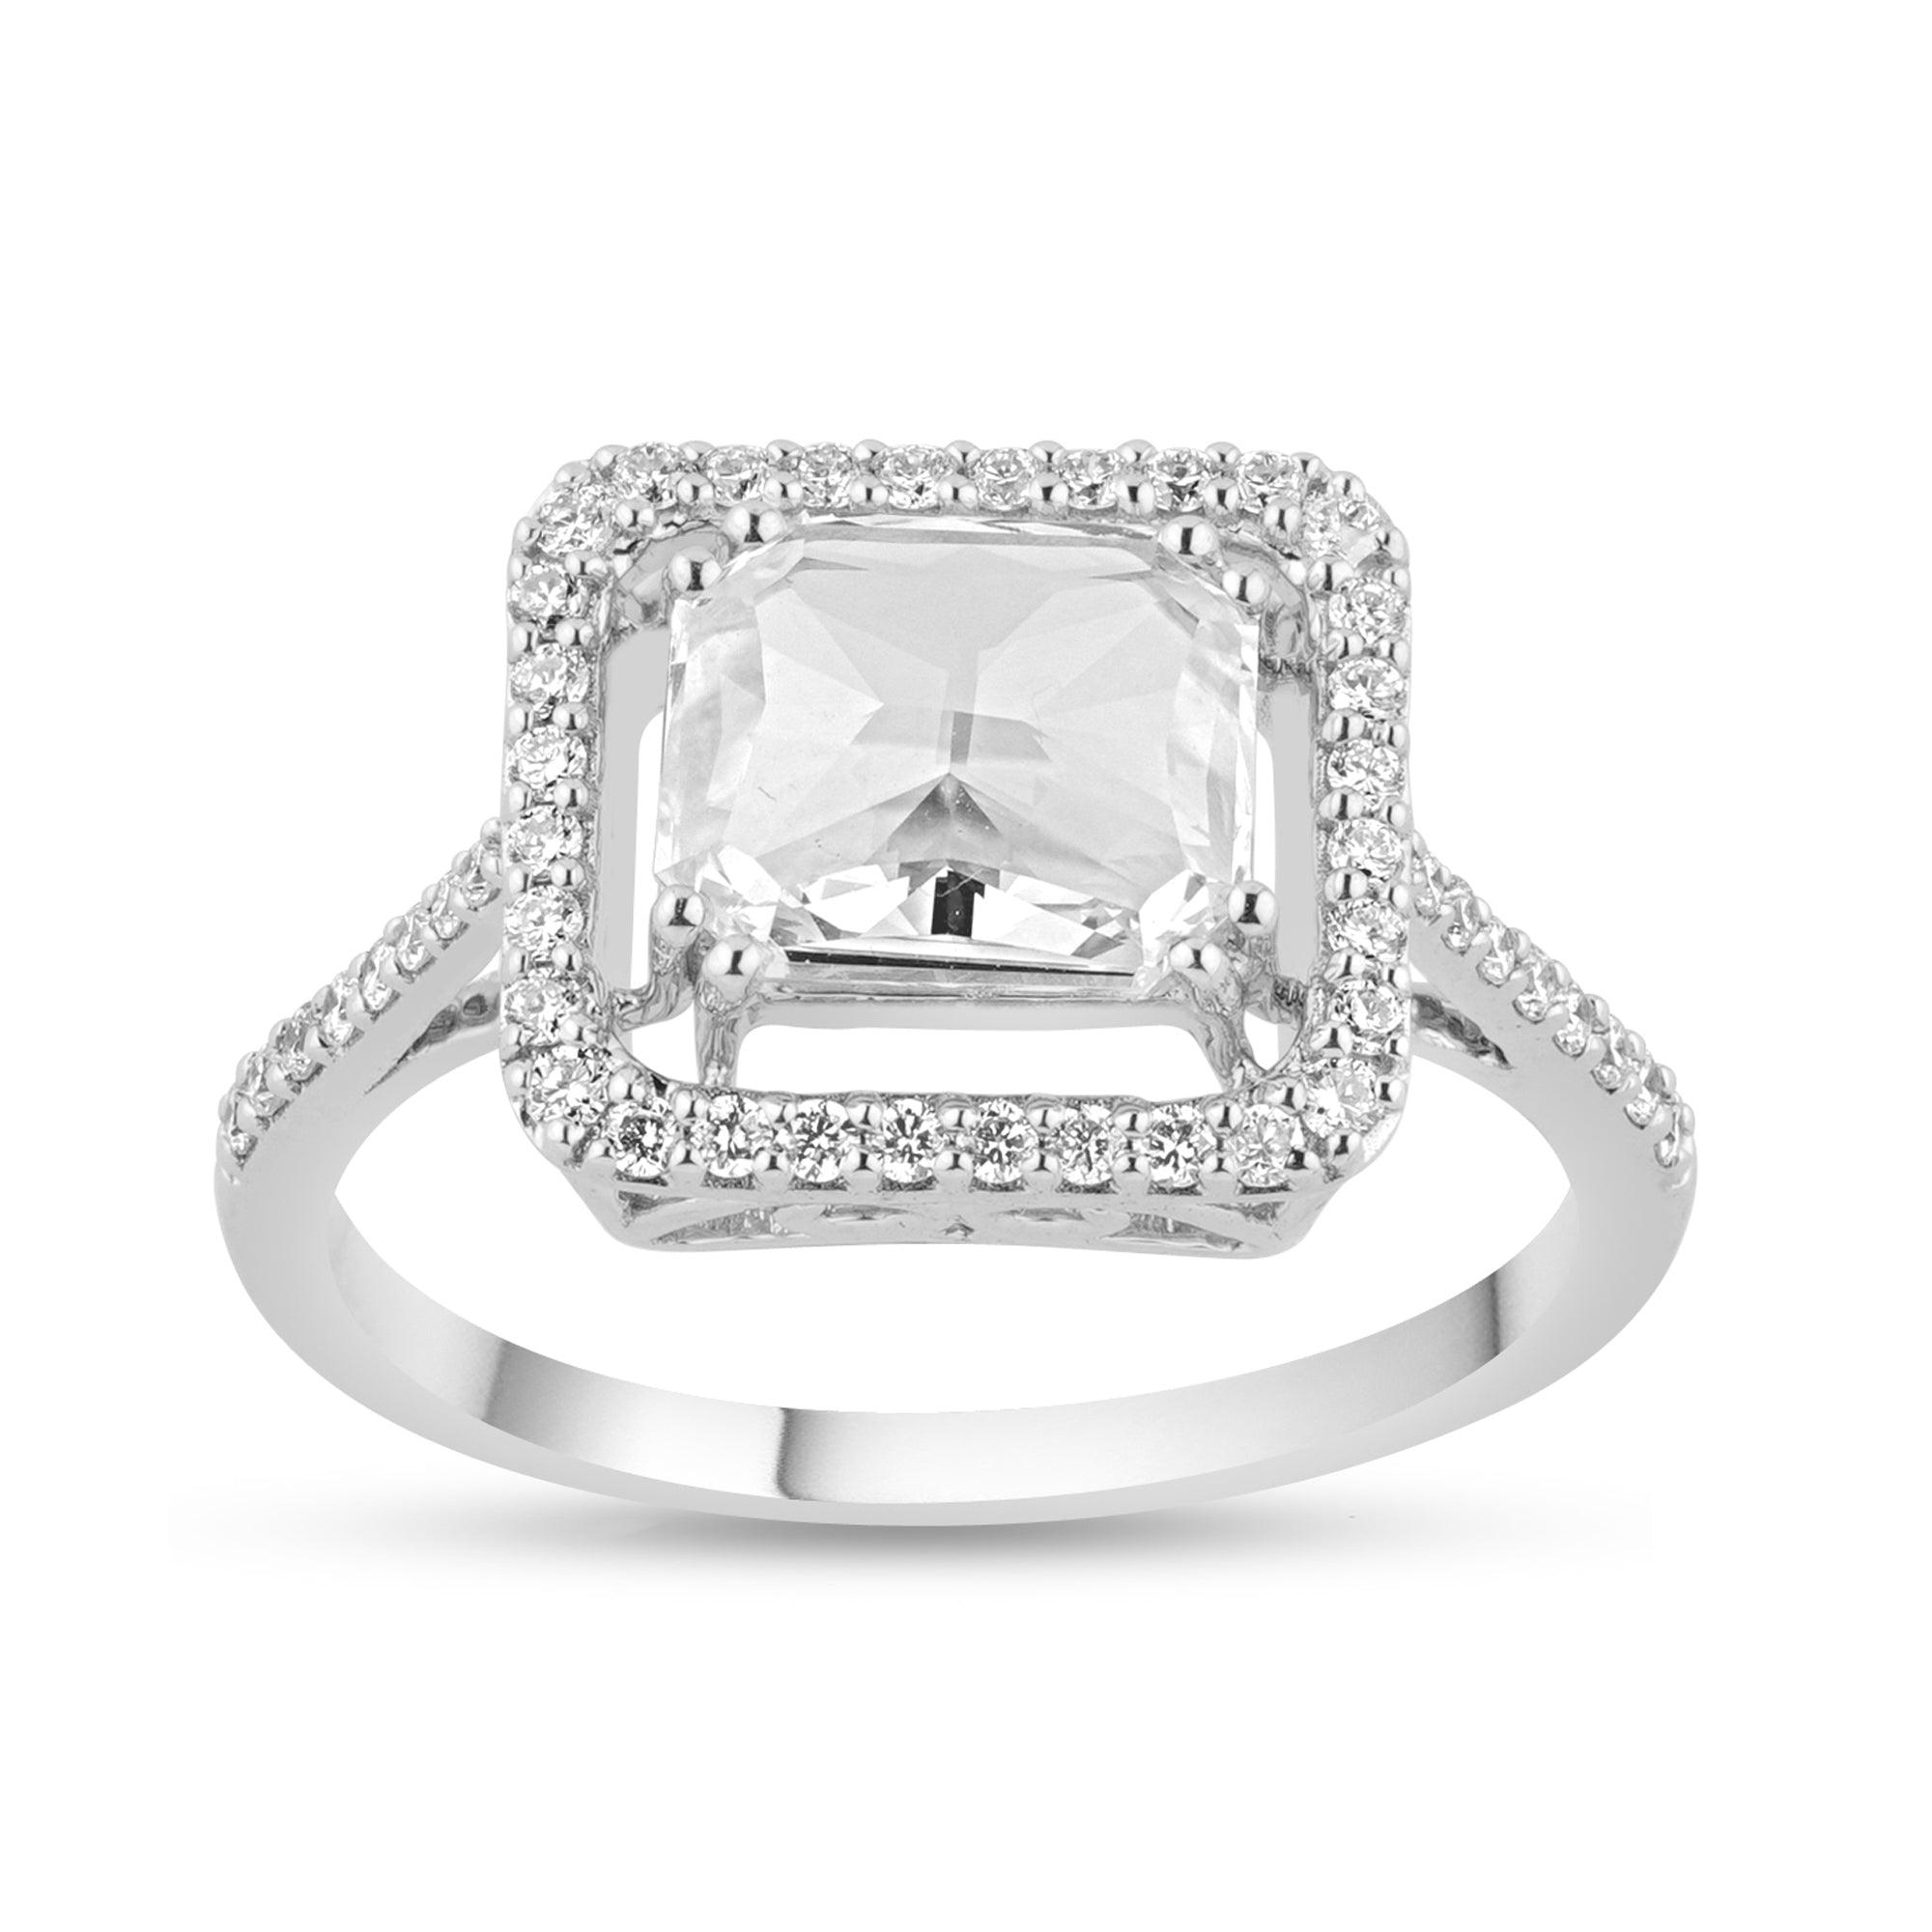 Moissanite Halo Ring with .81ct Rose Cut Center Stone - Harmony Bound